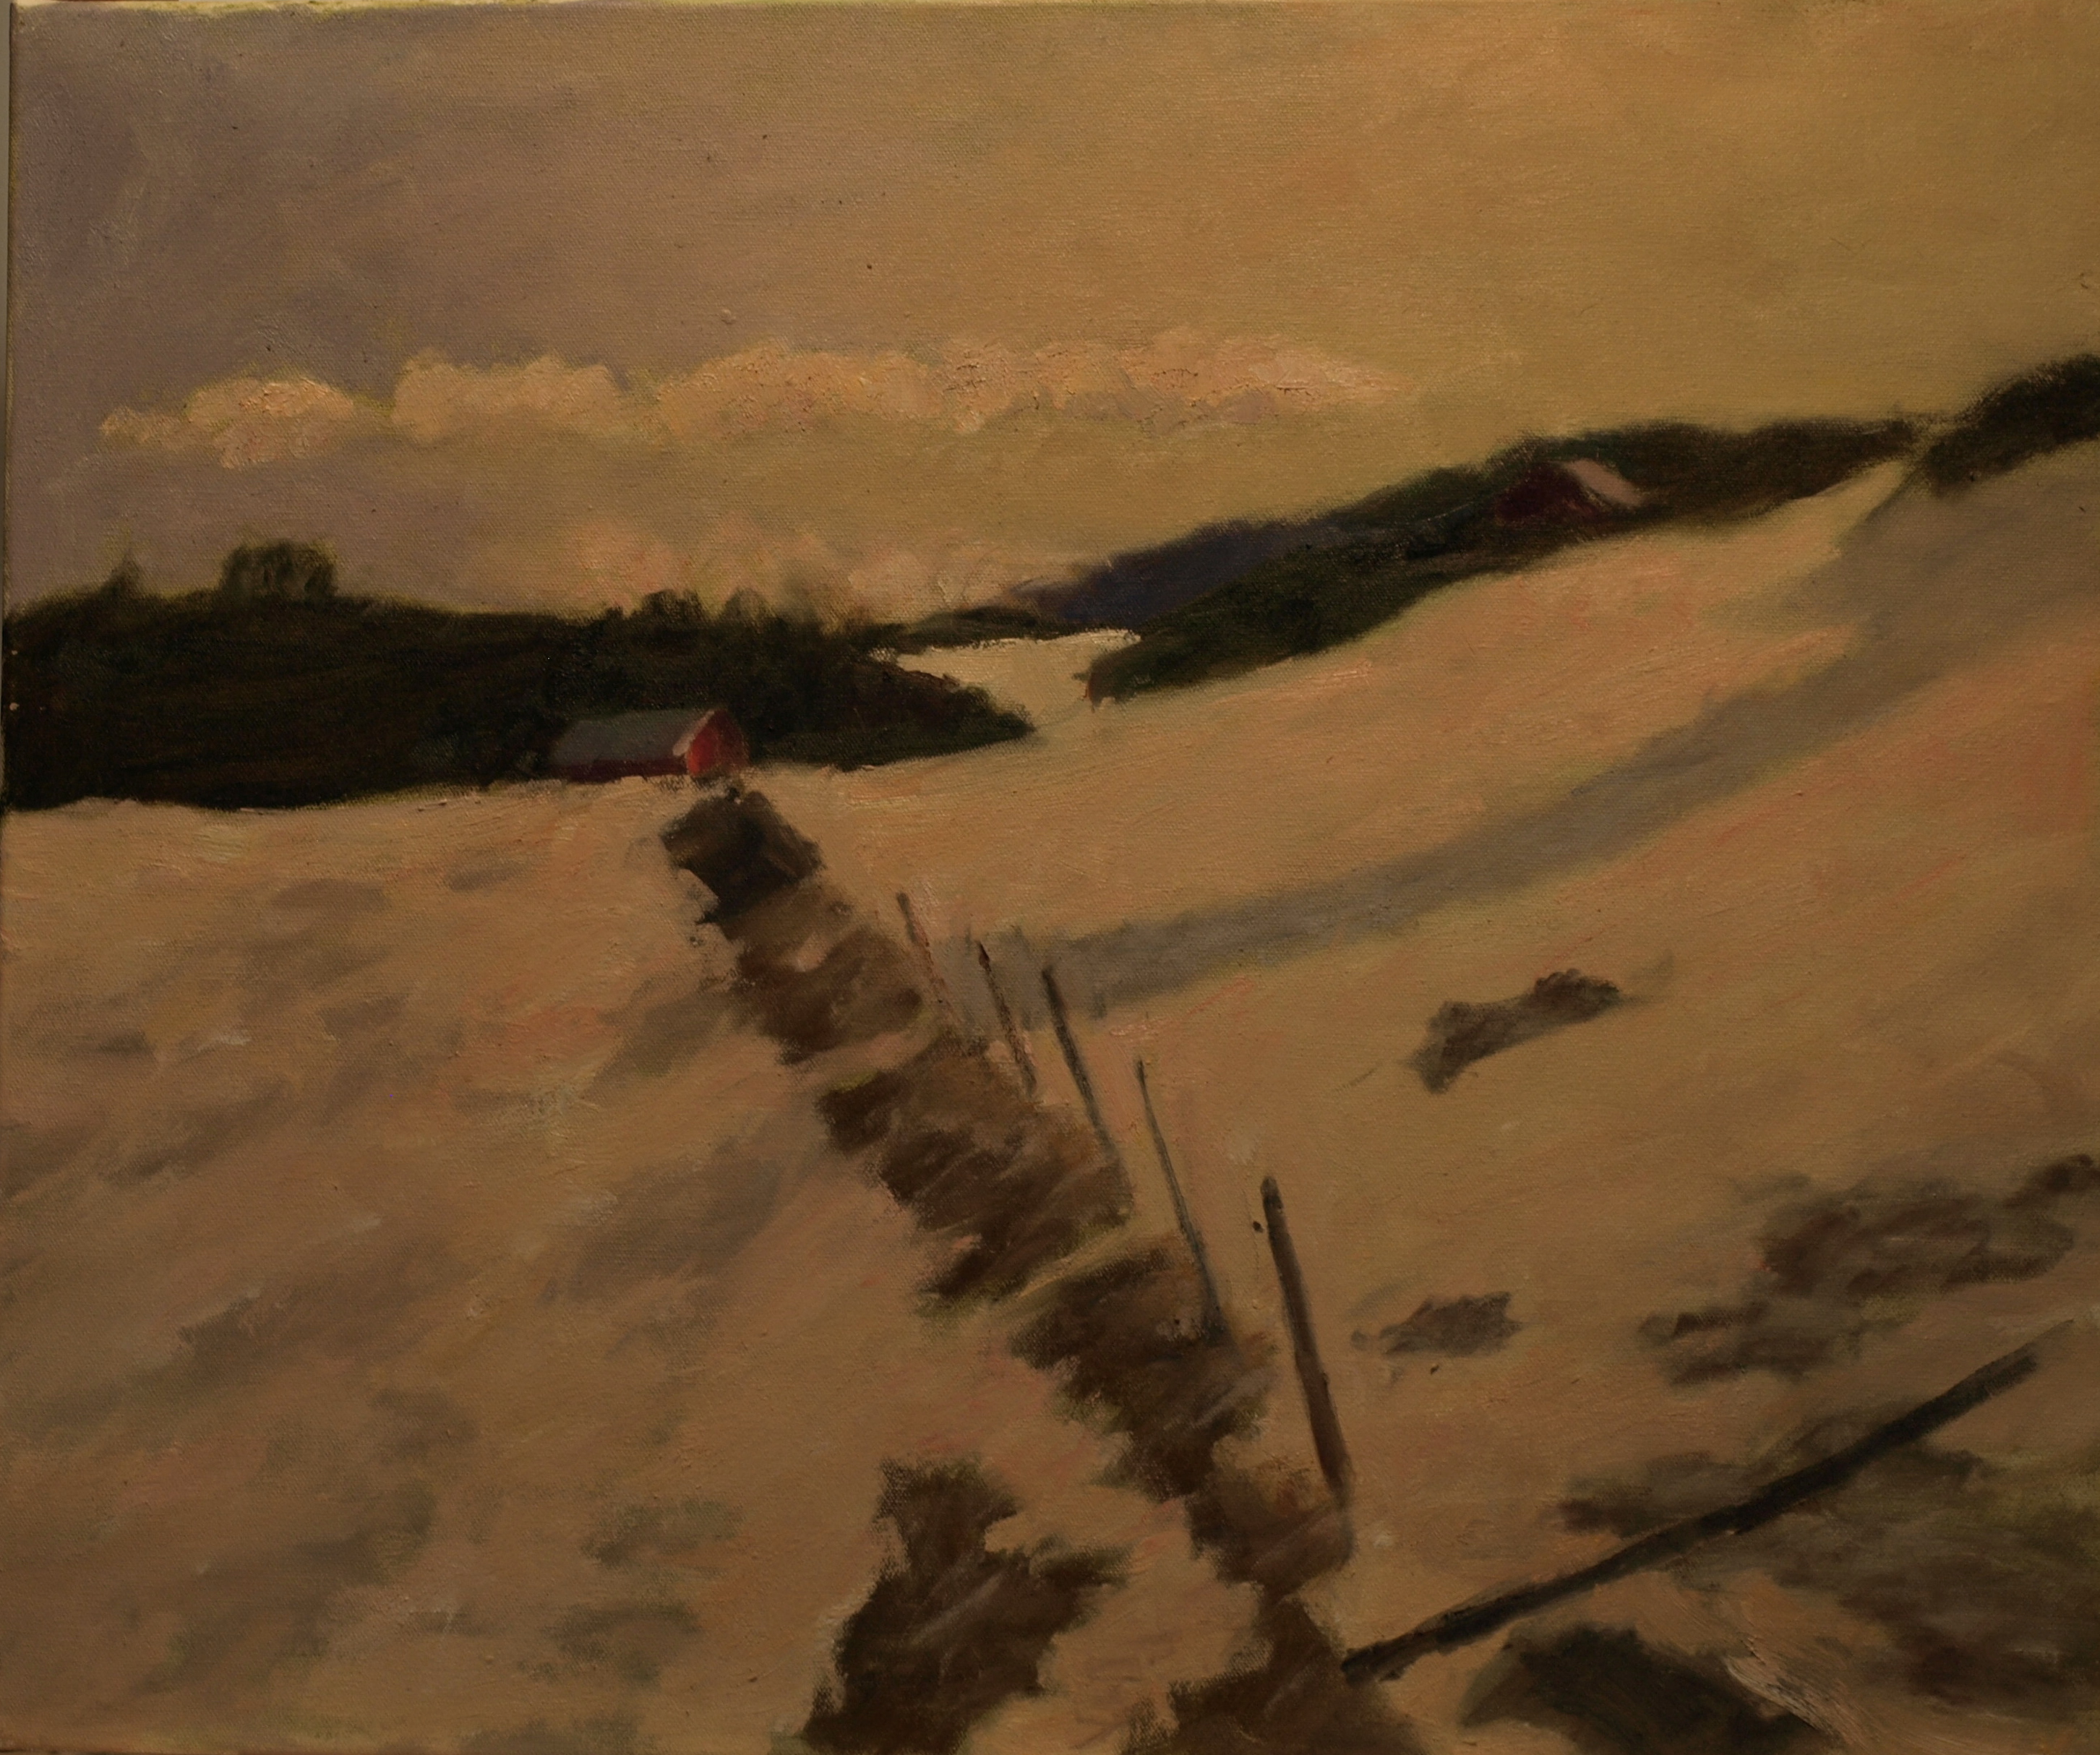 Old Fence Row - Snow, Oil on Canvas, 20 x 24 Inches, by Richard Stalter, $700